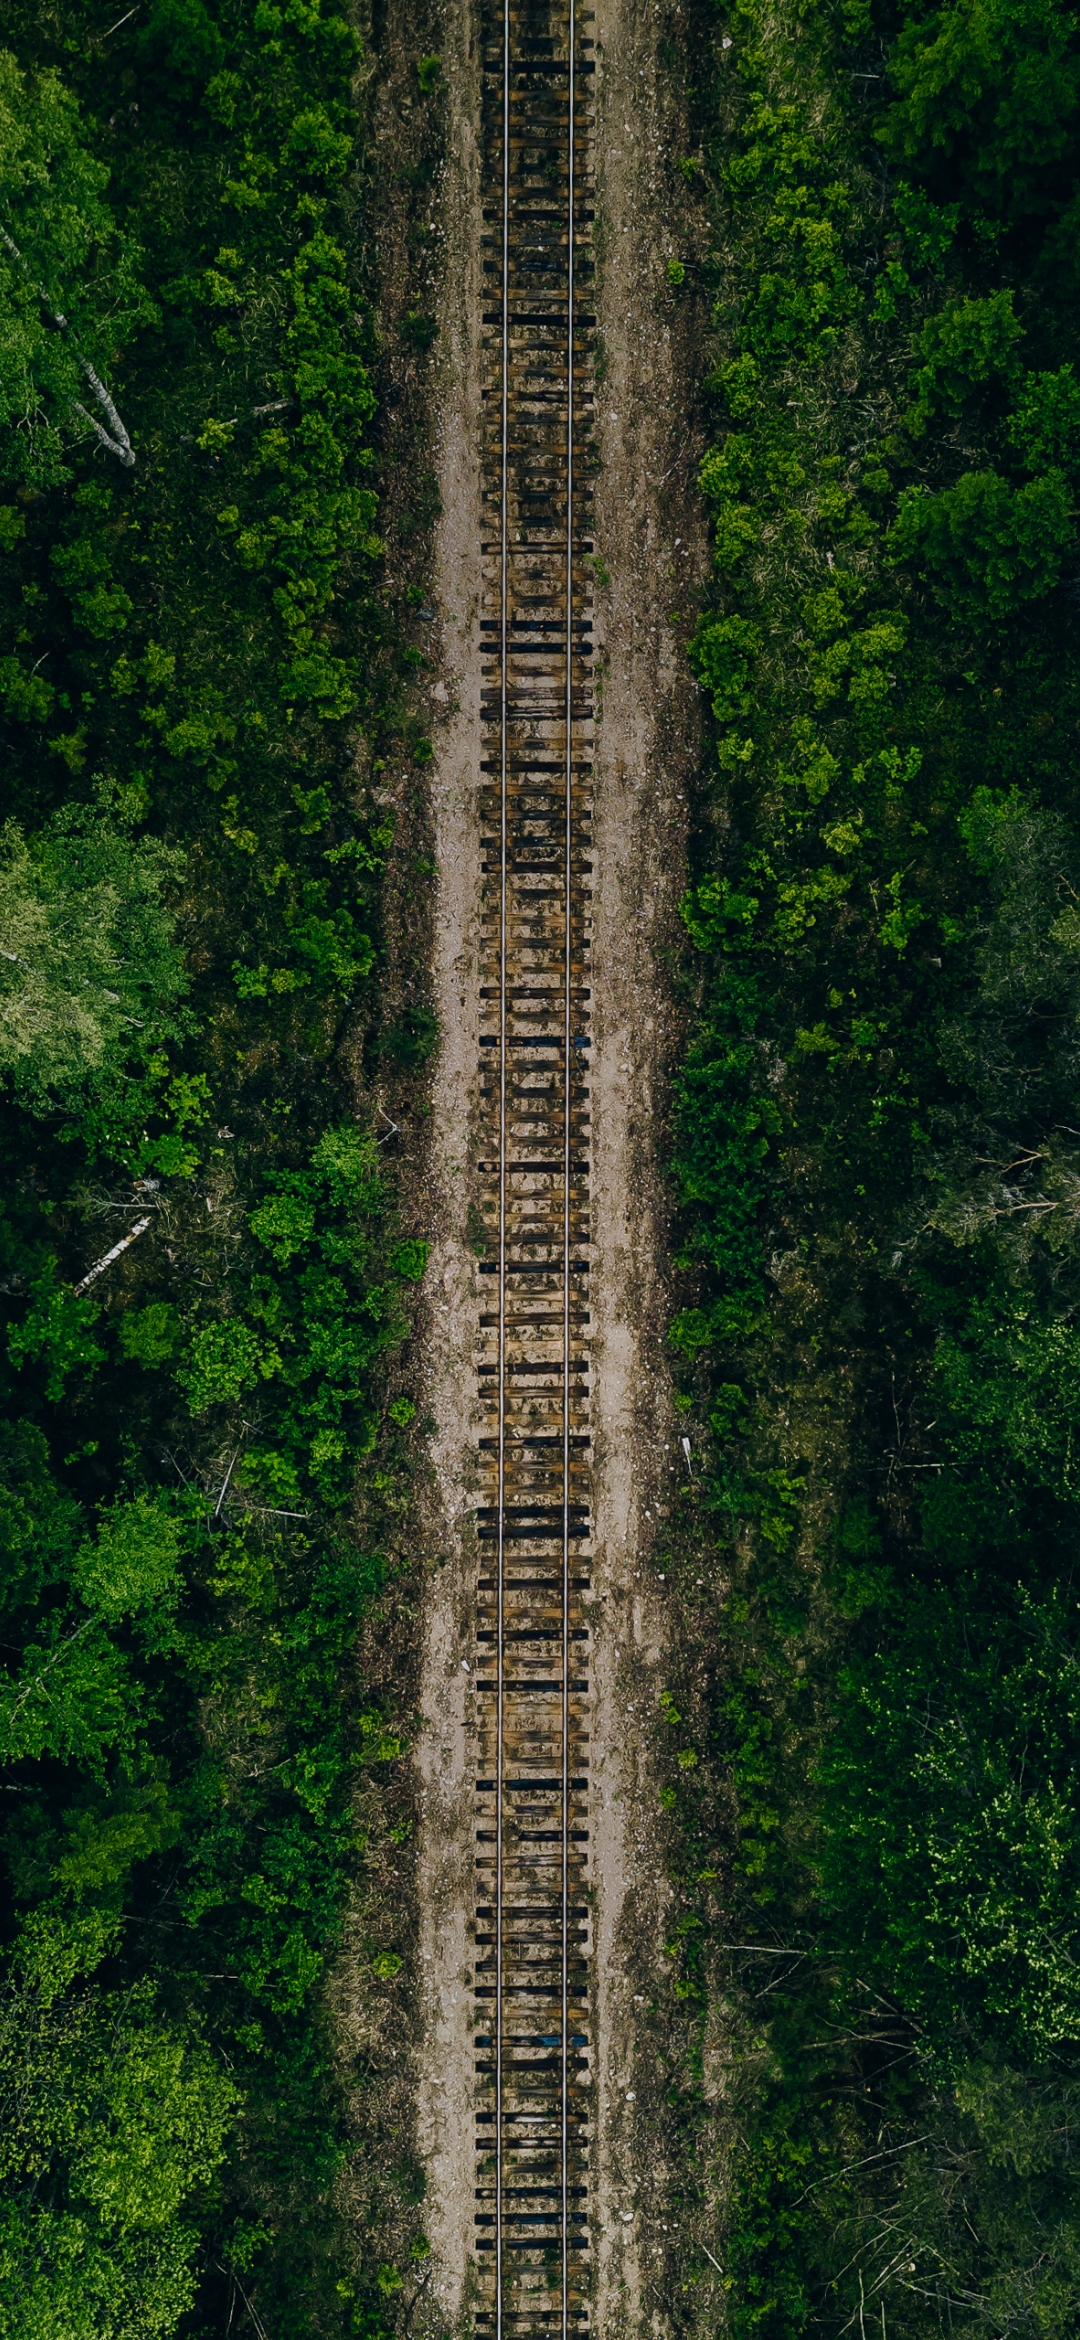 Aerial view of a railway track in a jungle